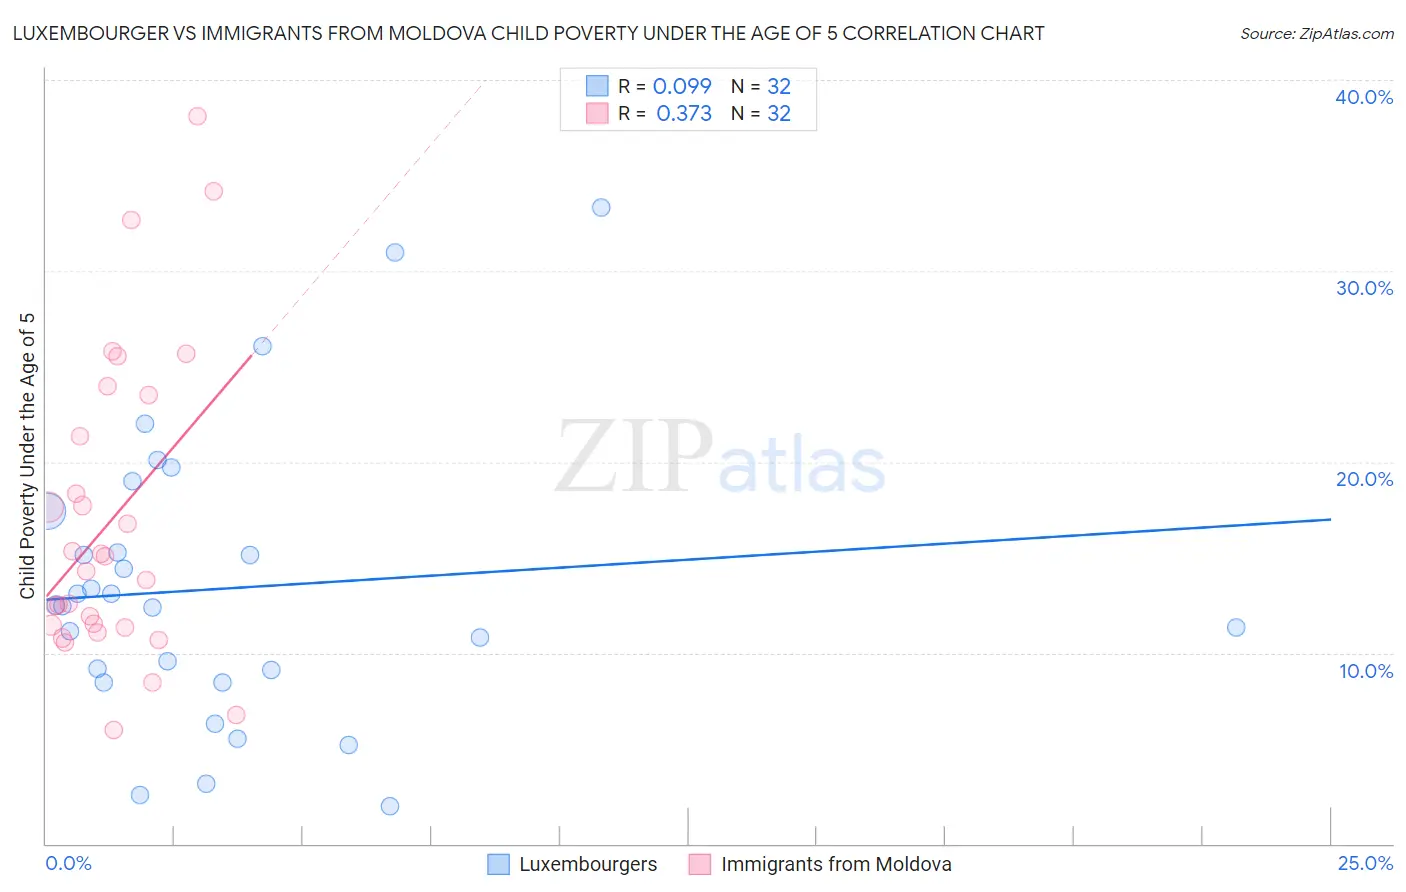 Luxembourger vs Immigrants from Moldova Child Poverty Under the Age of 5